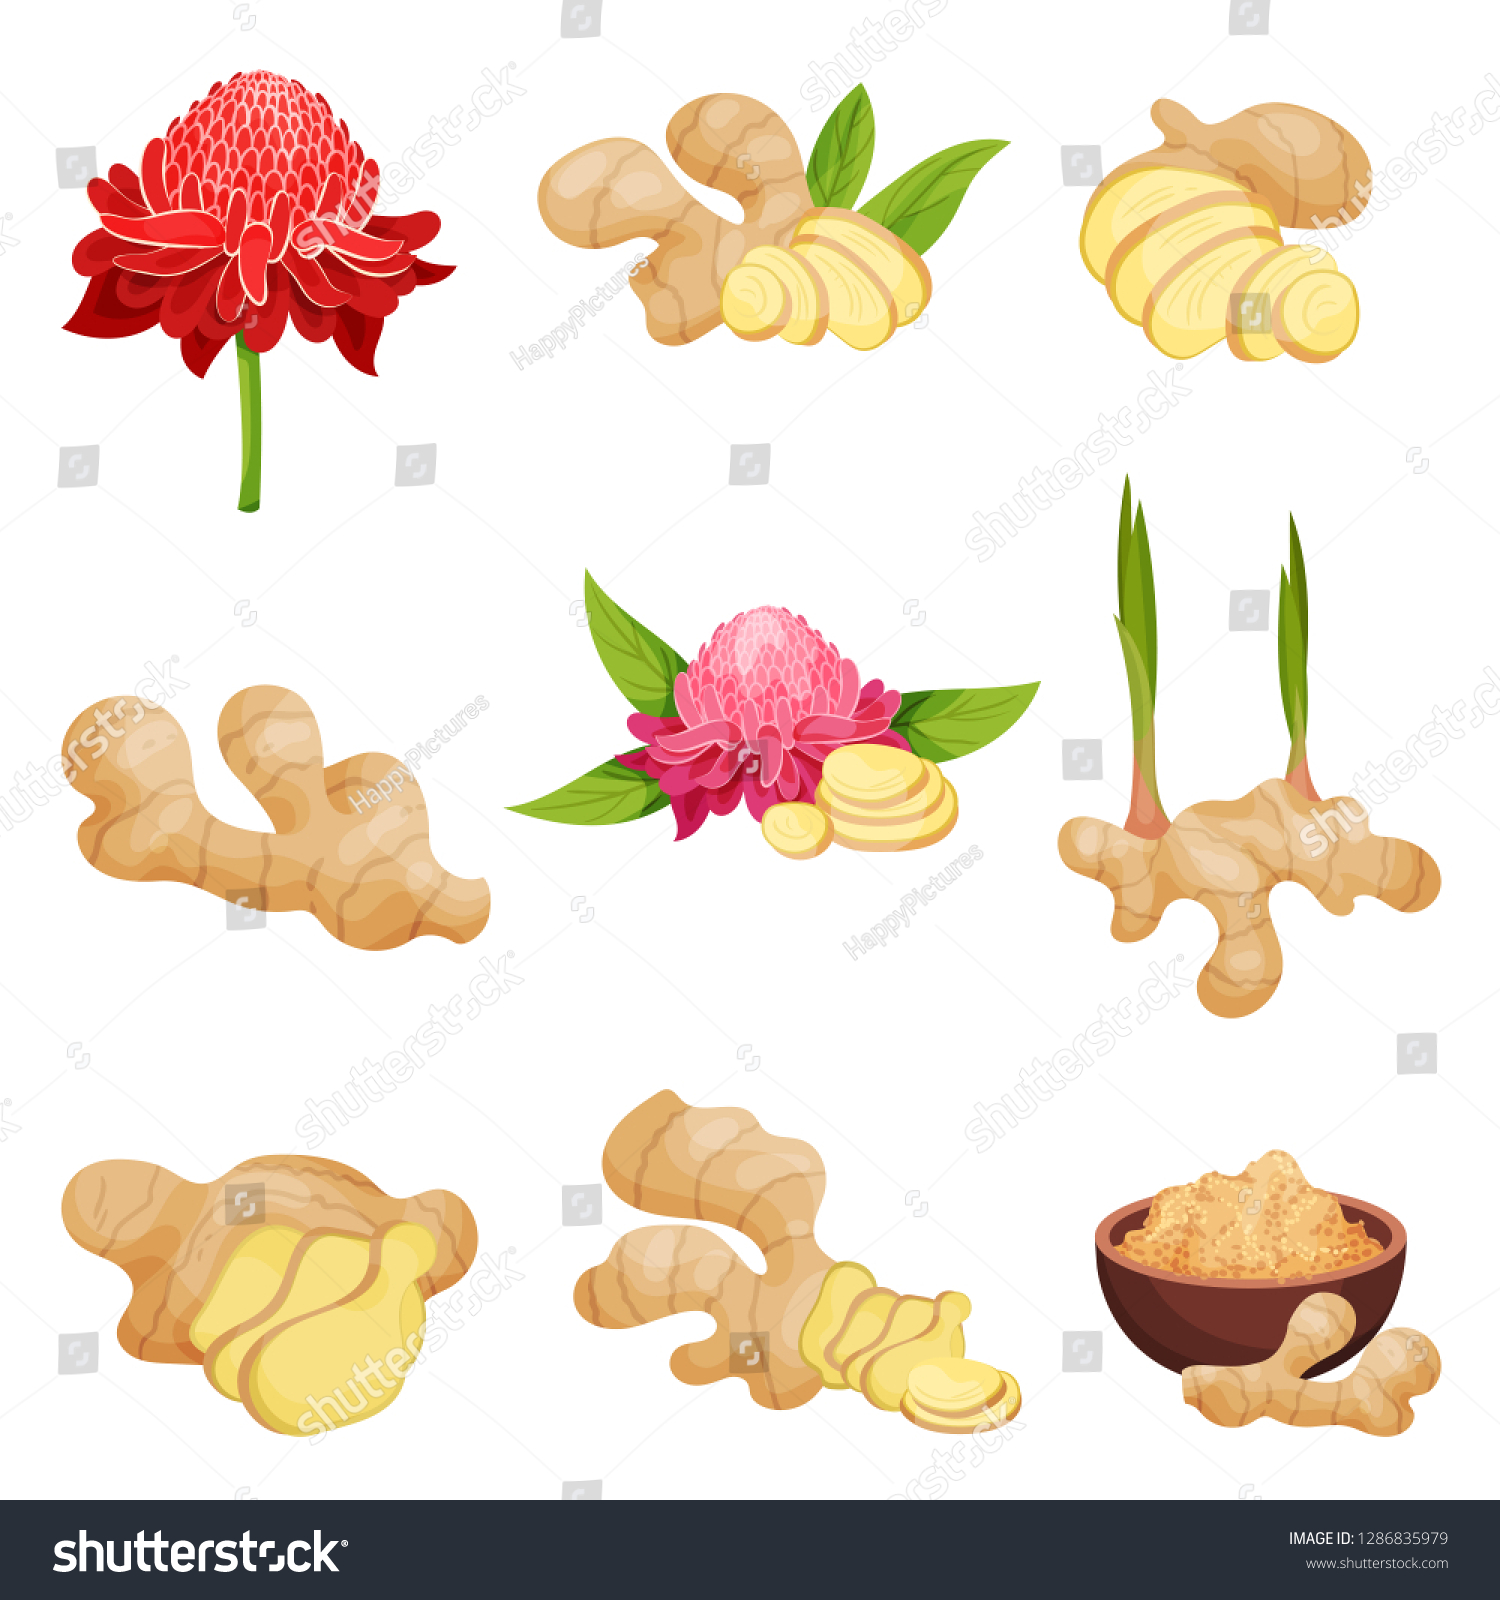 Flat vector set of ginger icons. Fresh roots with slices, flowers and powder. Aromatic spice. Natural food #1286835979